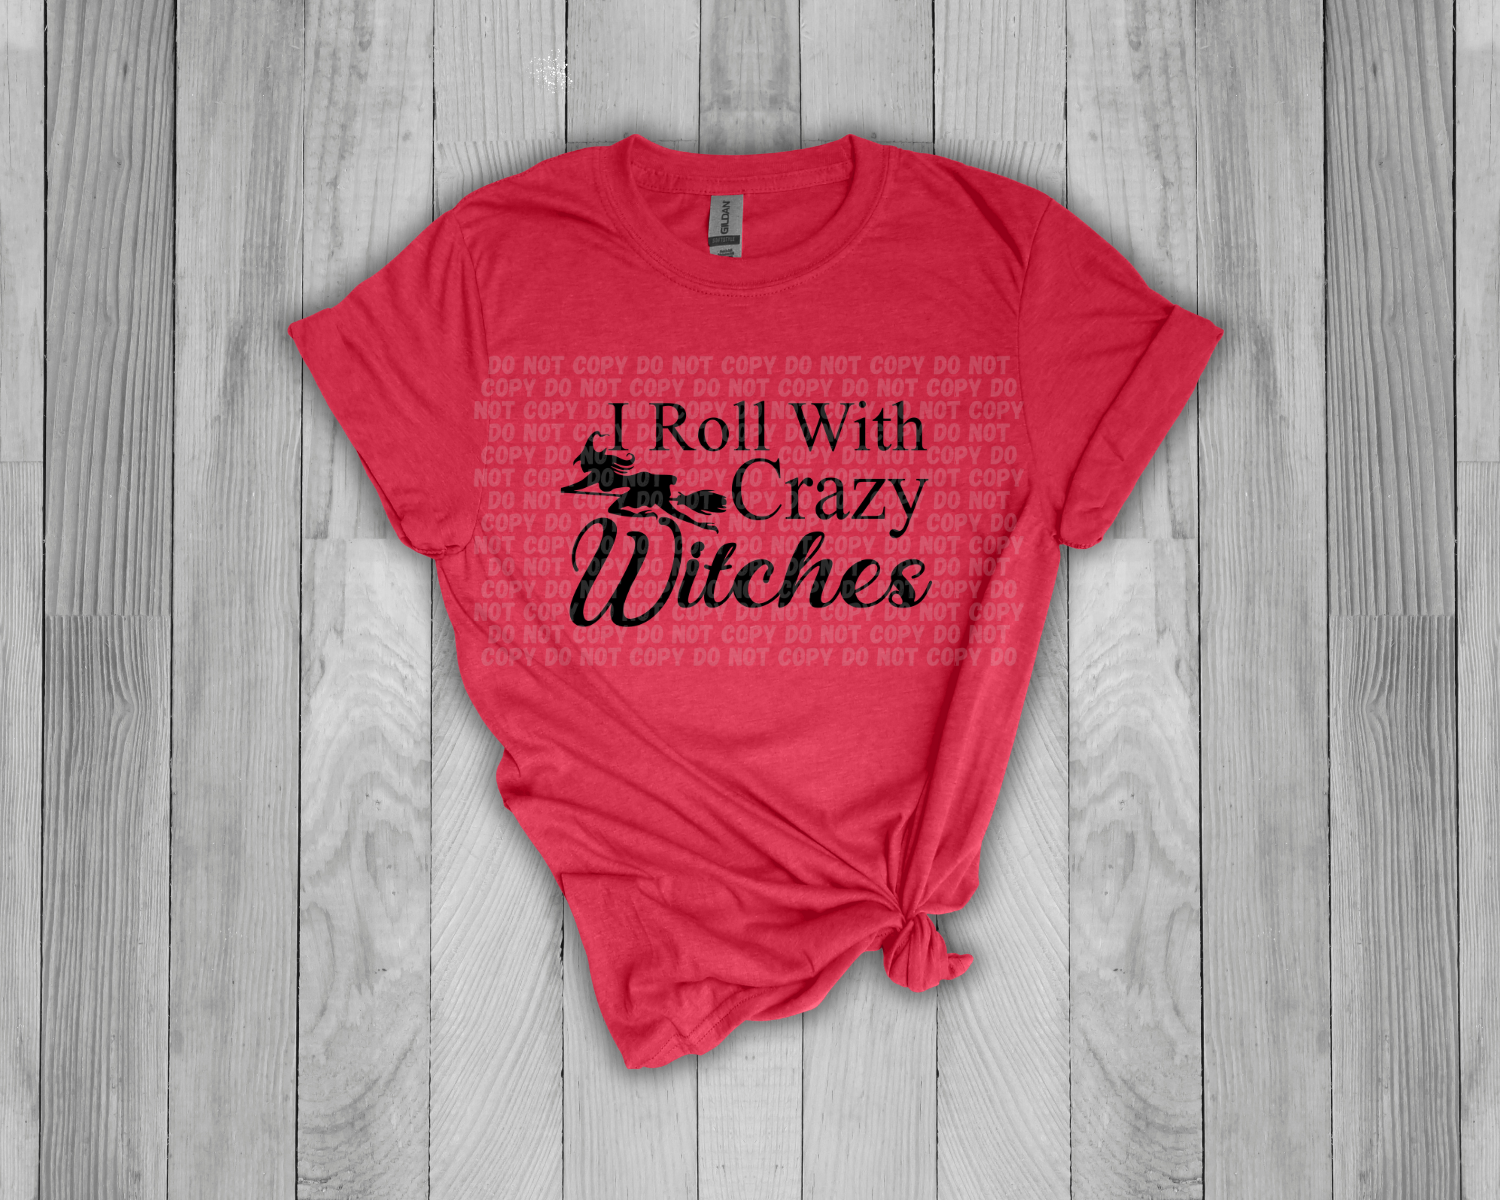 I Roll With Crazy Witches Shirt - Mayan Sub Shop